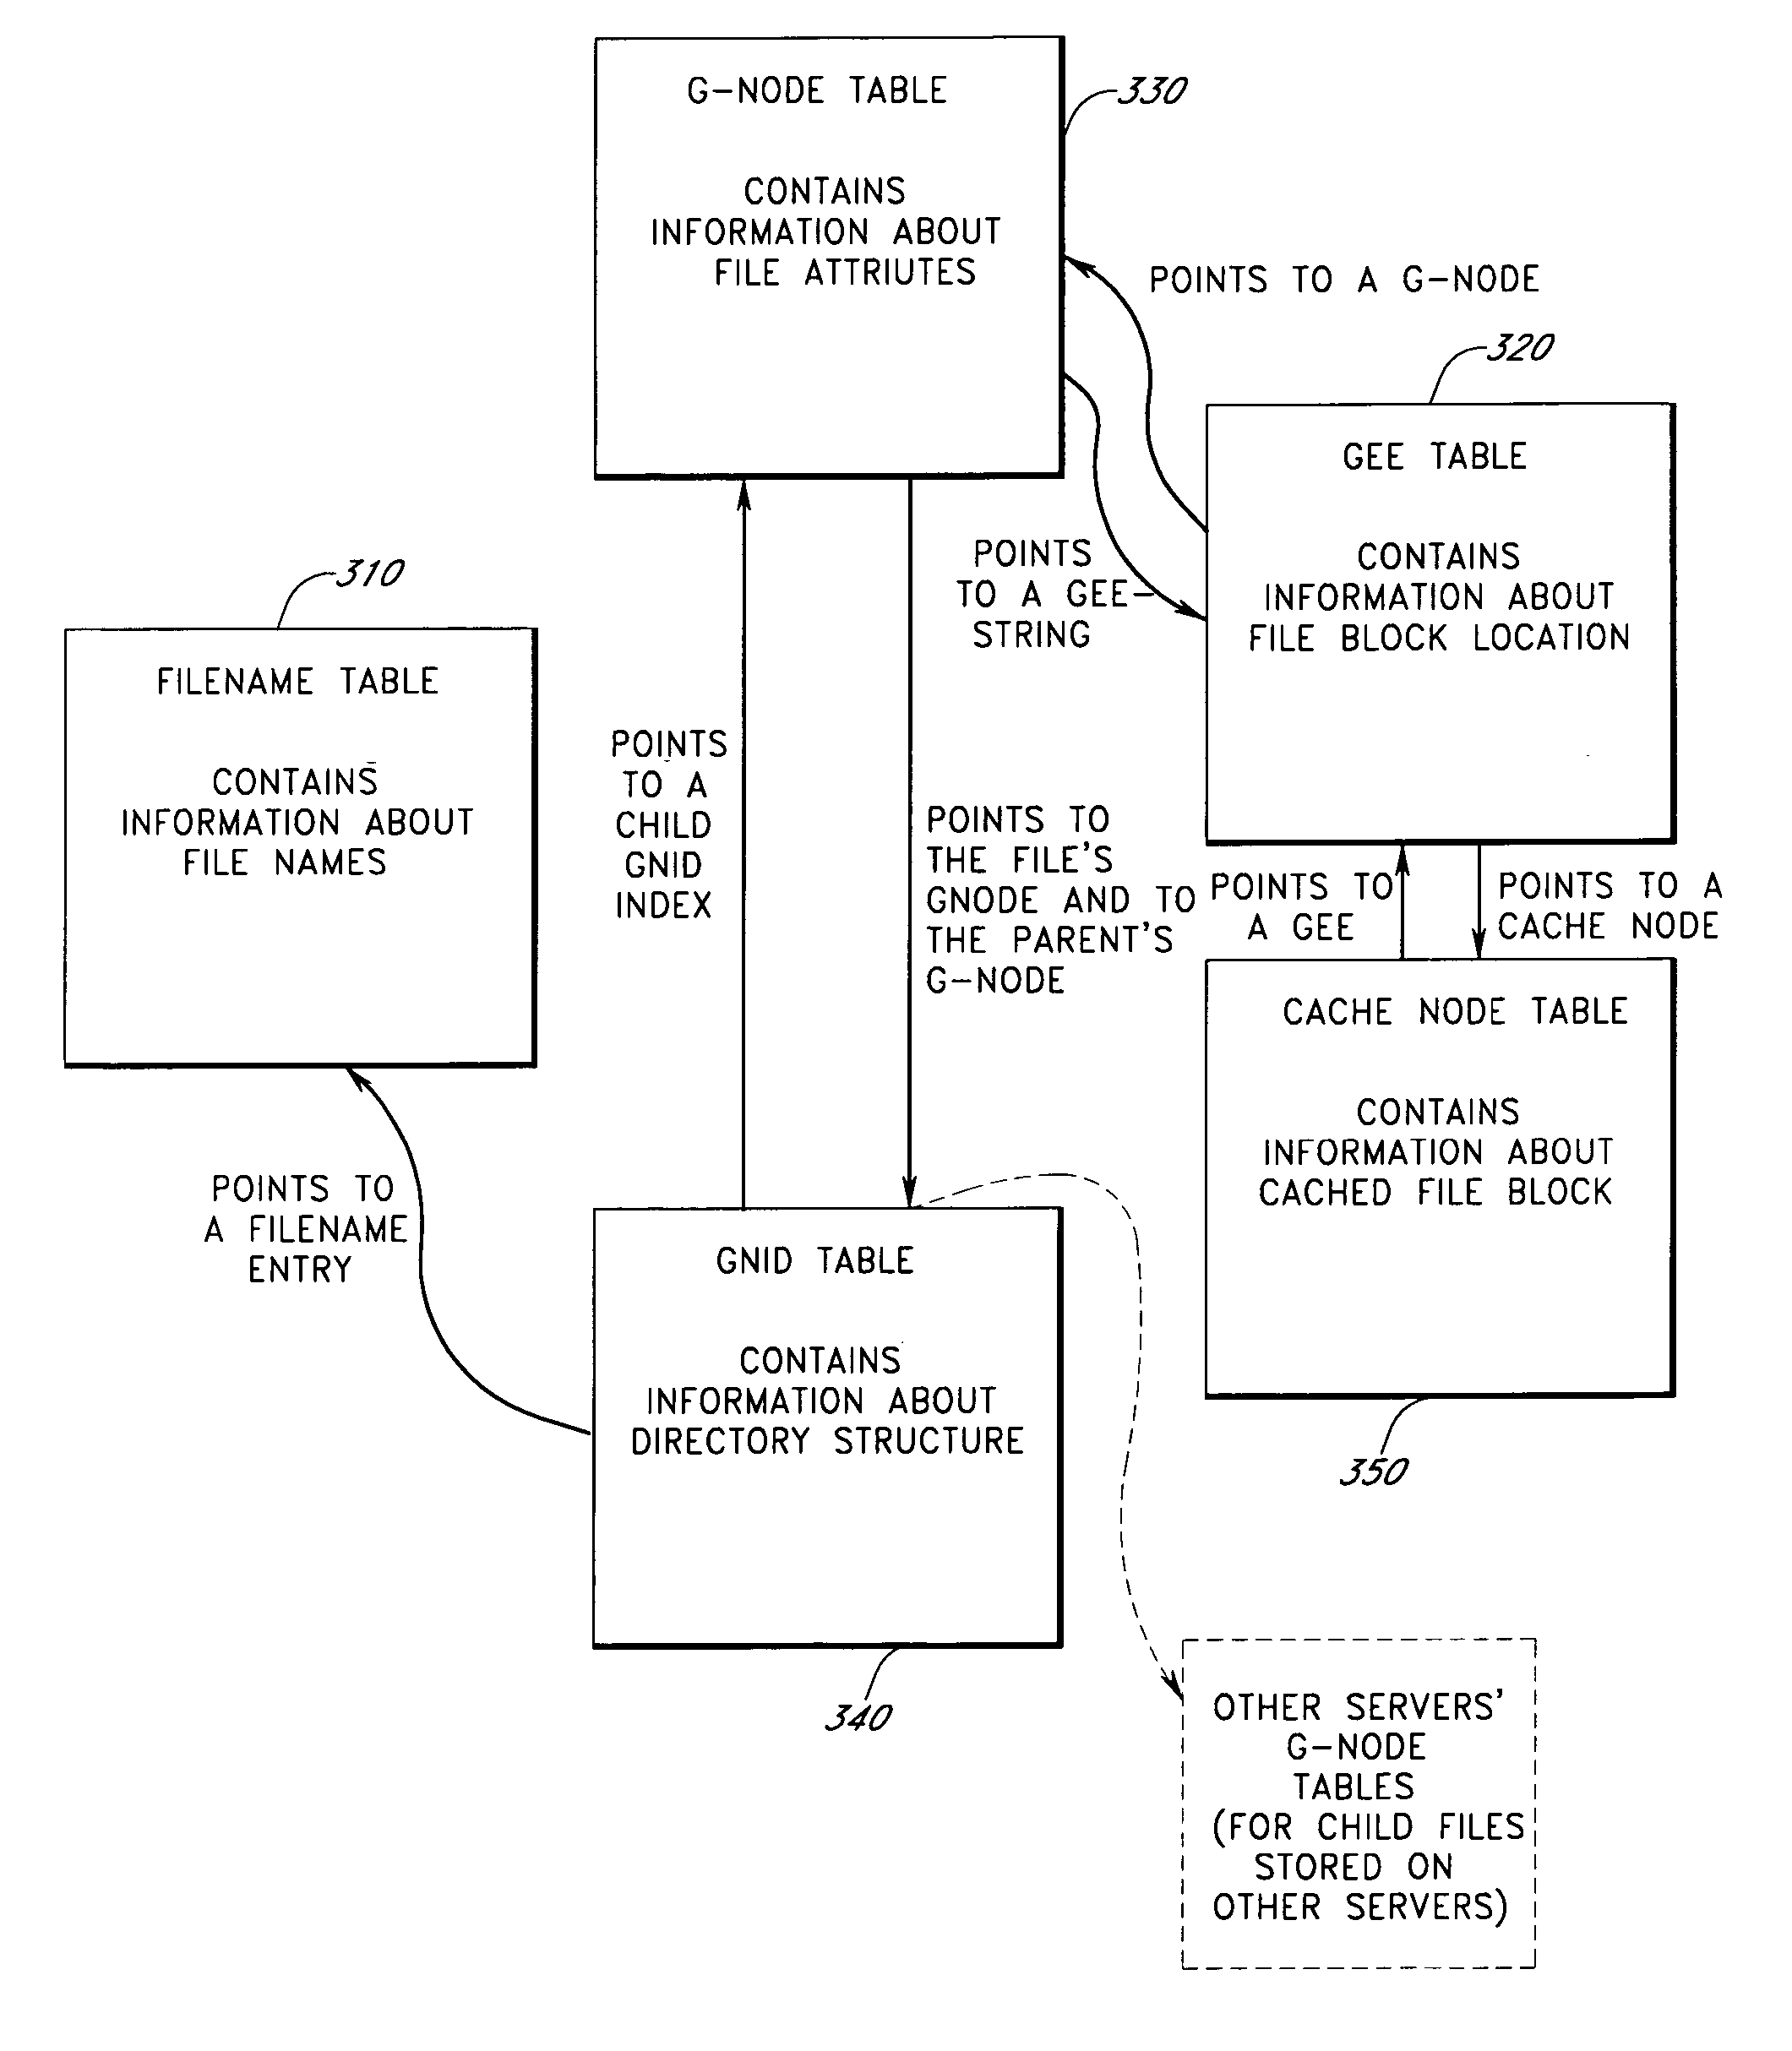 Fault-tolerant computer network file systems and methods